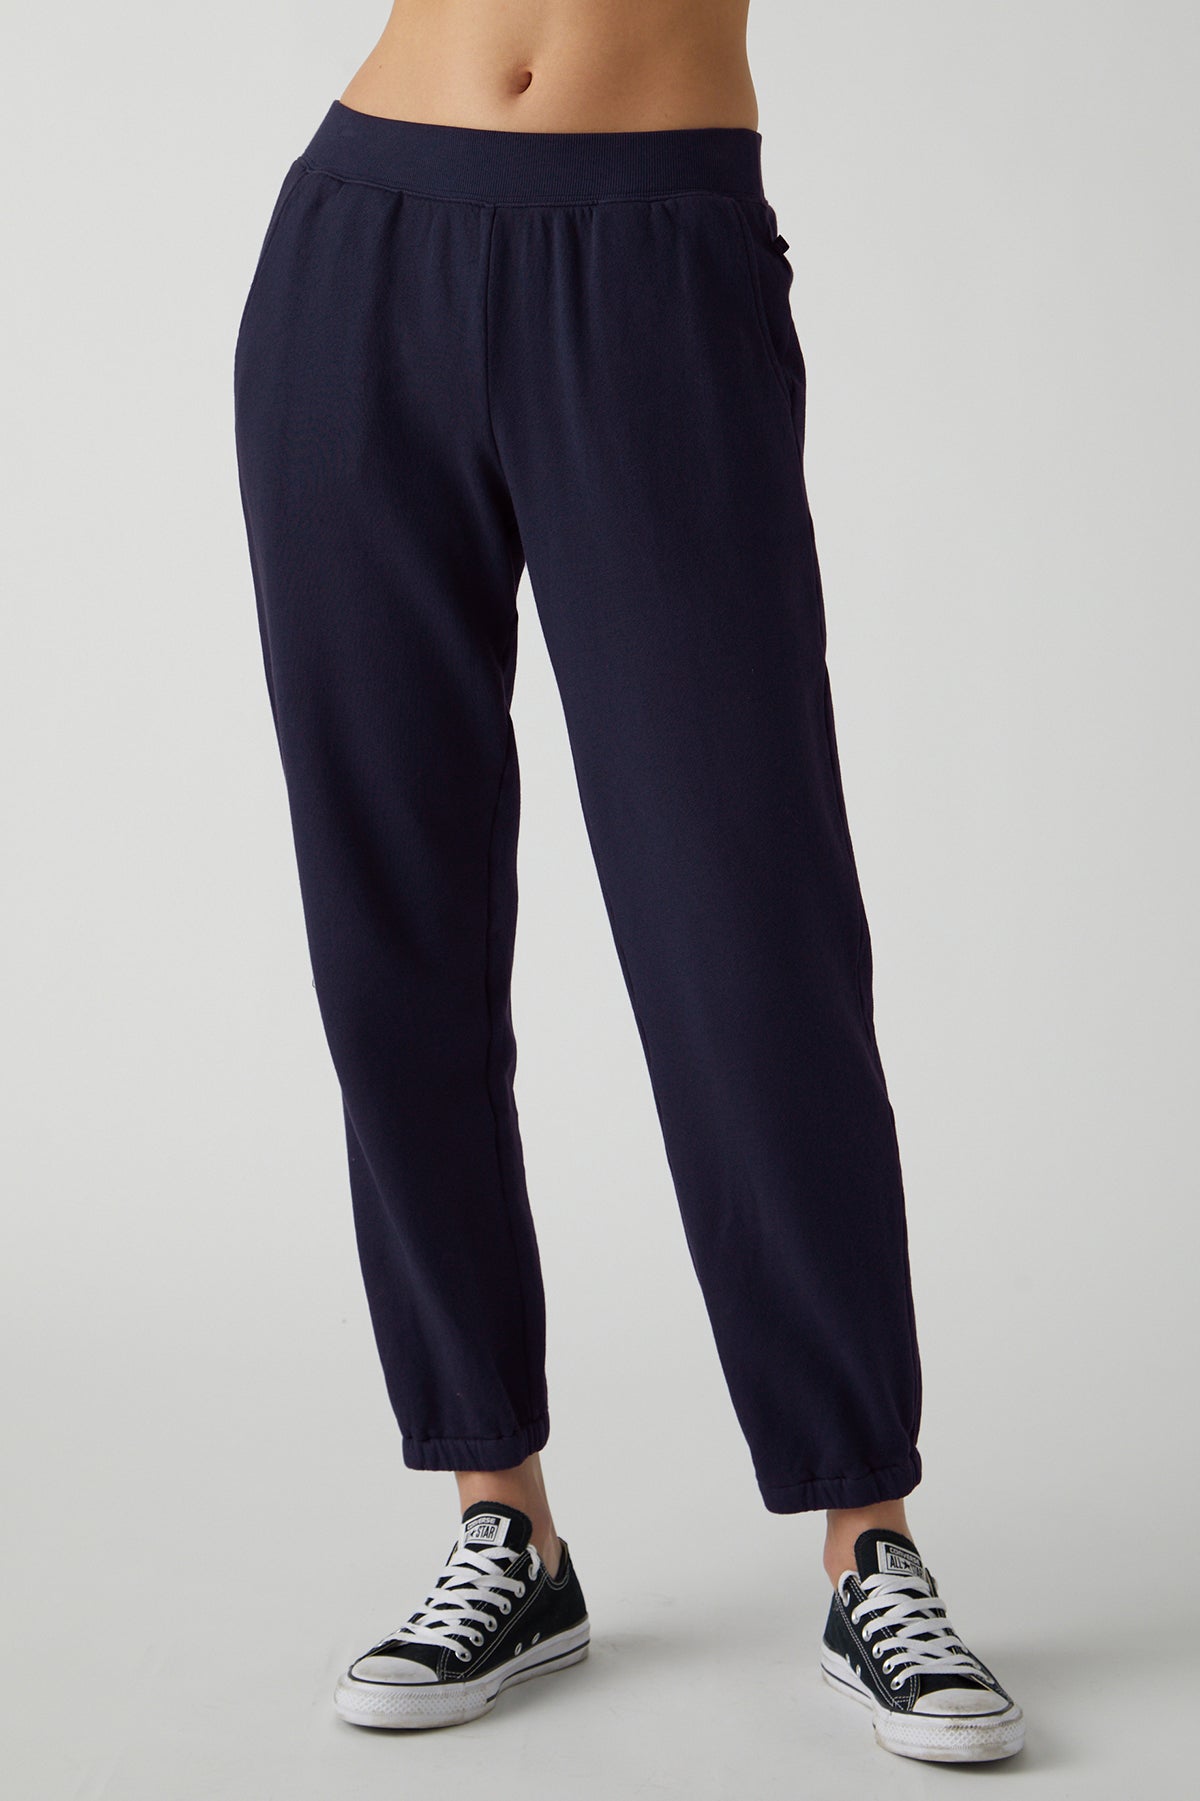 Zuma Sweatpant in navy front-25484308906177